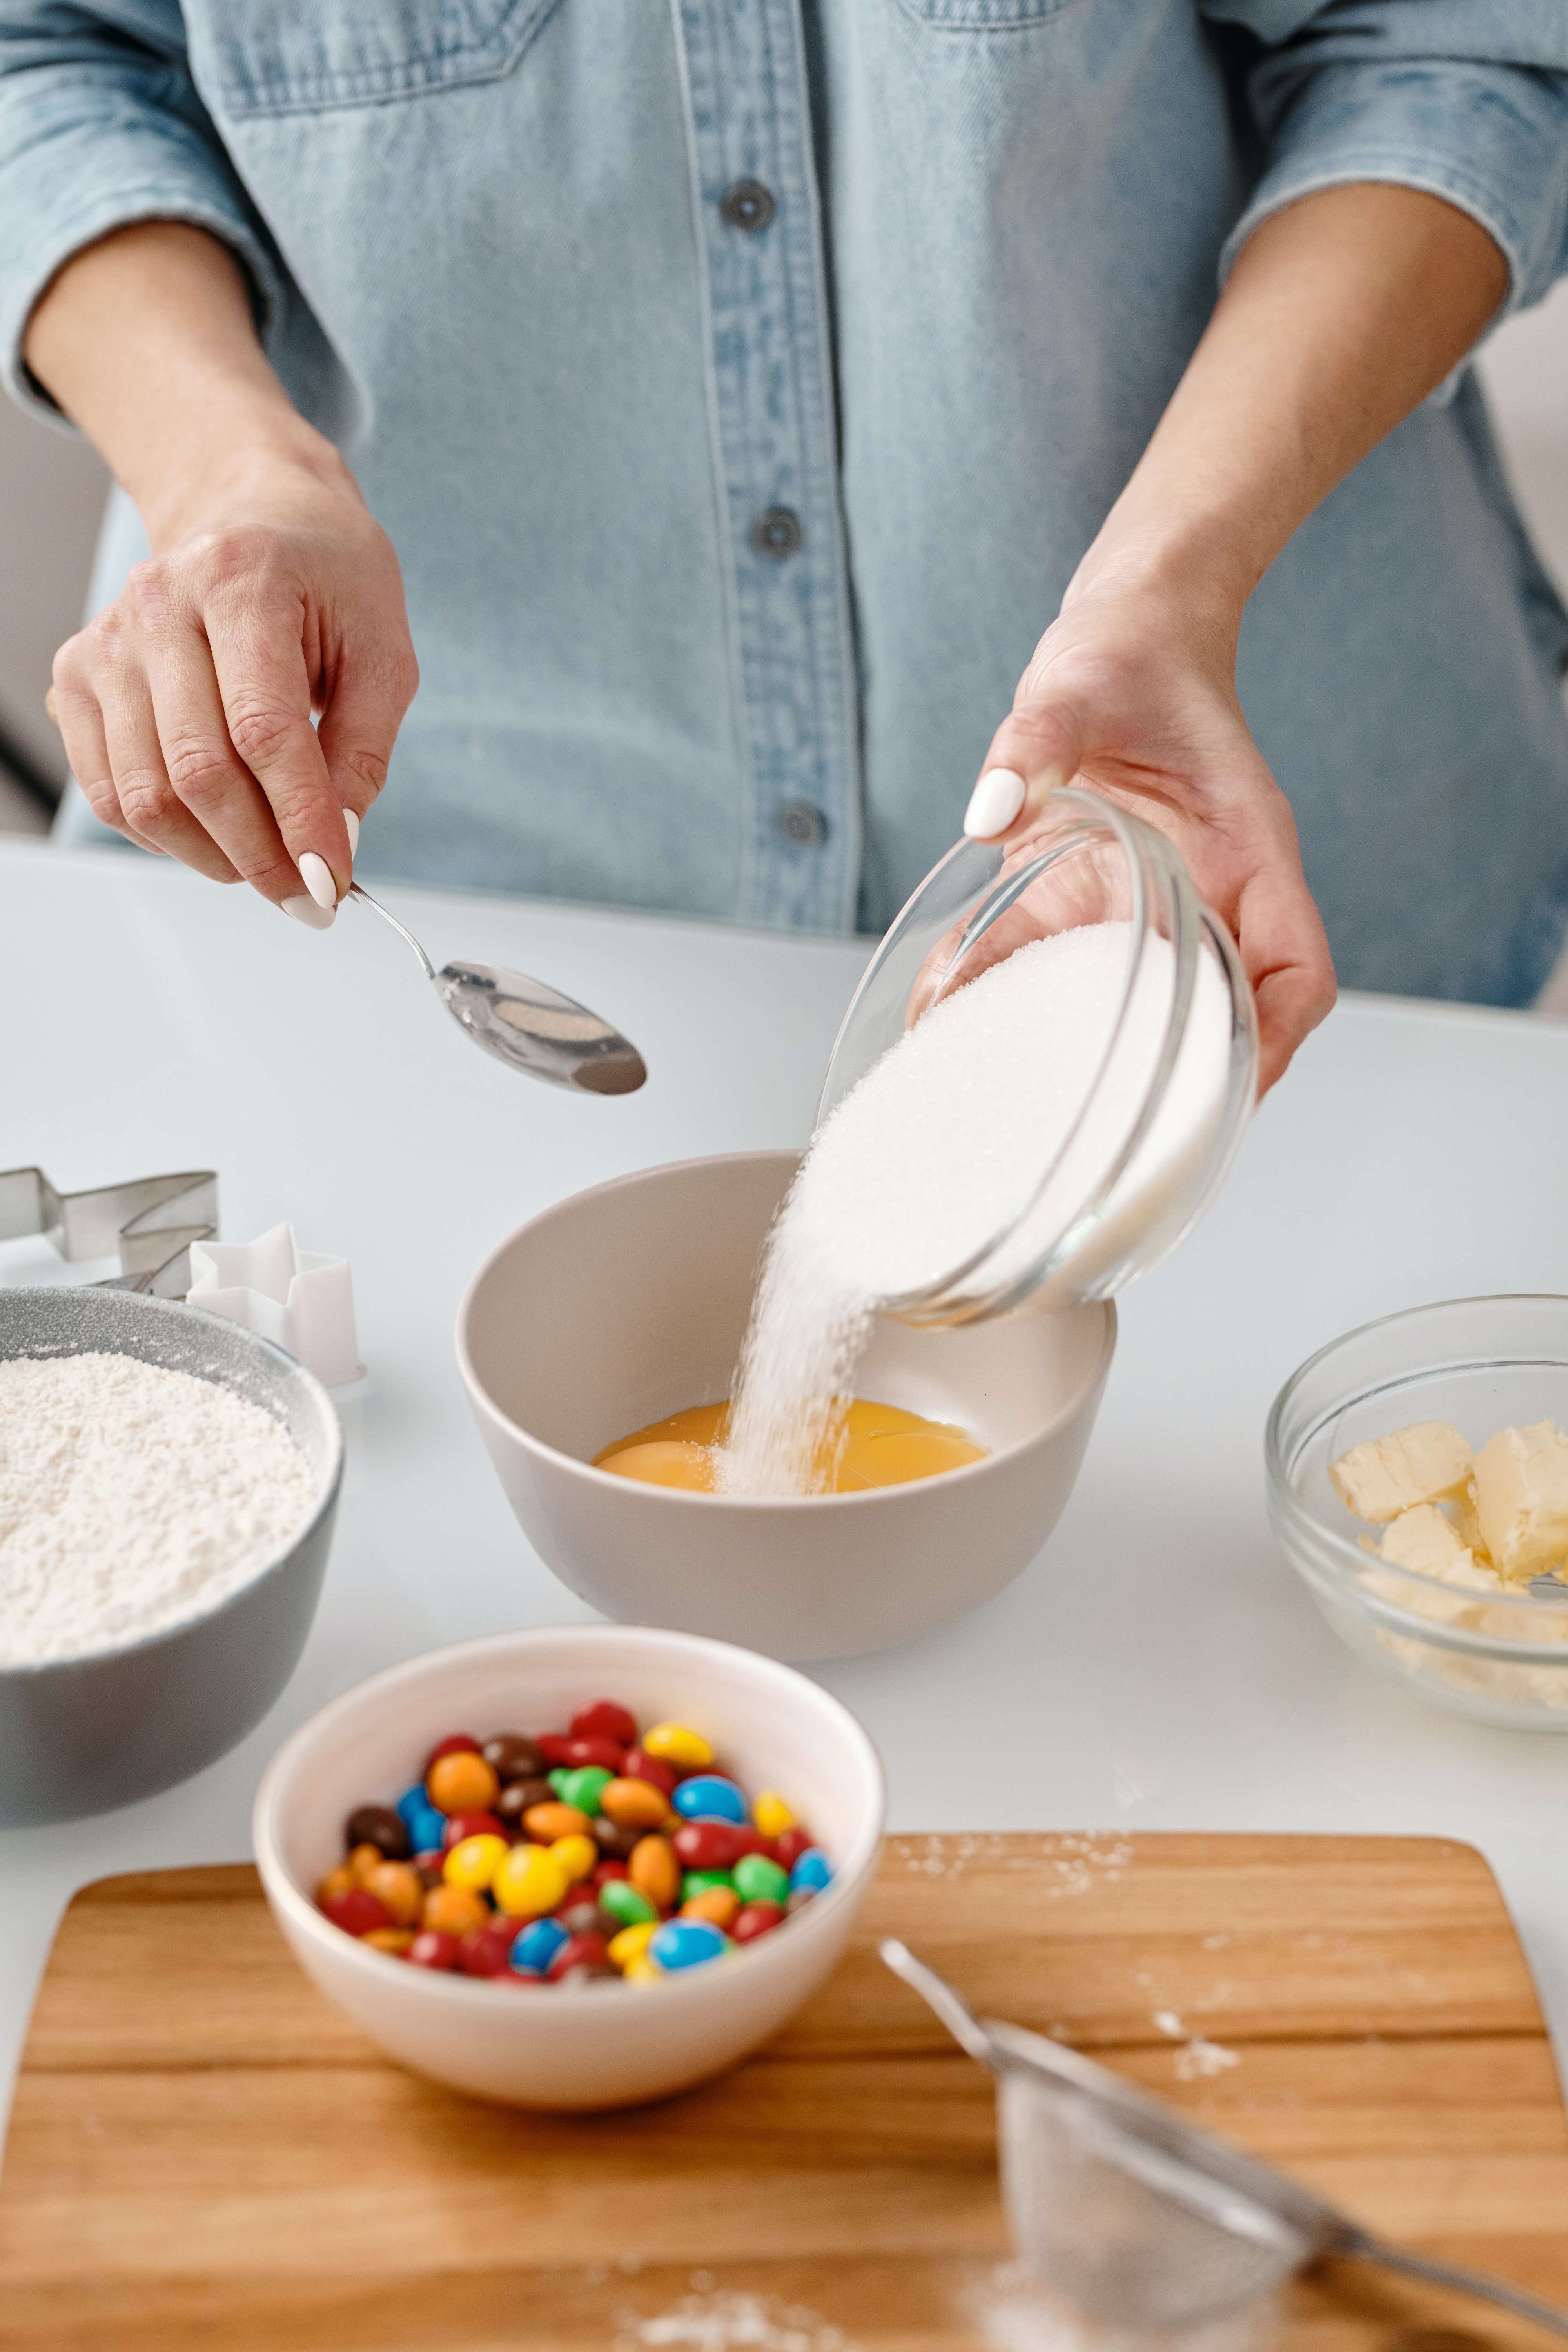 Avoid the use of artificial sweeteners, refined flours & sugar